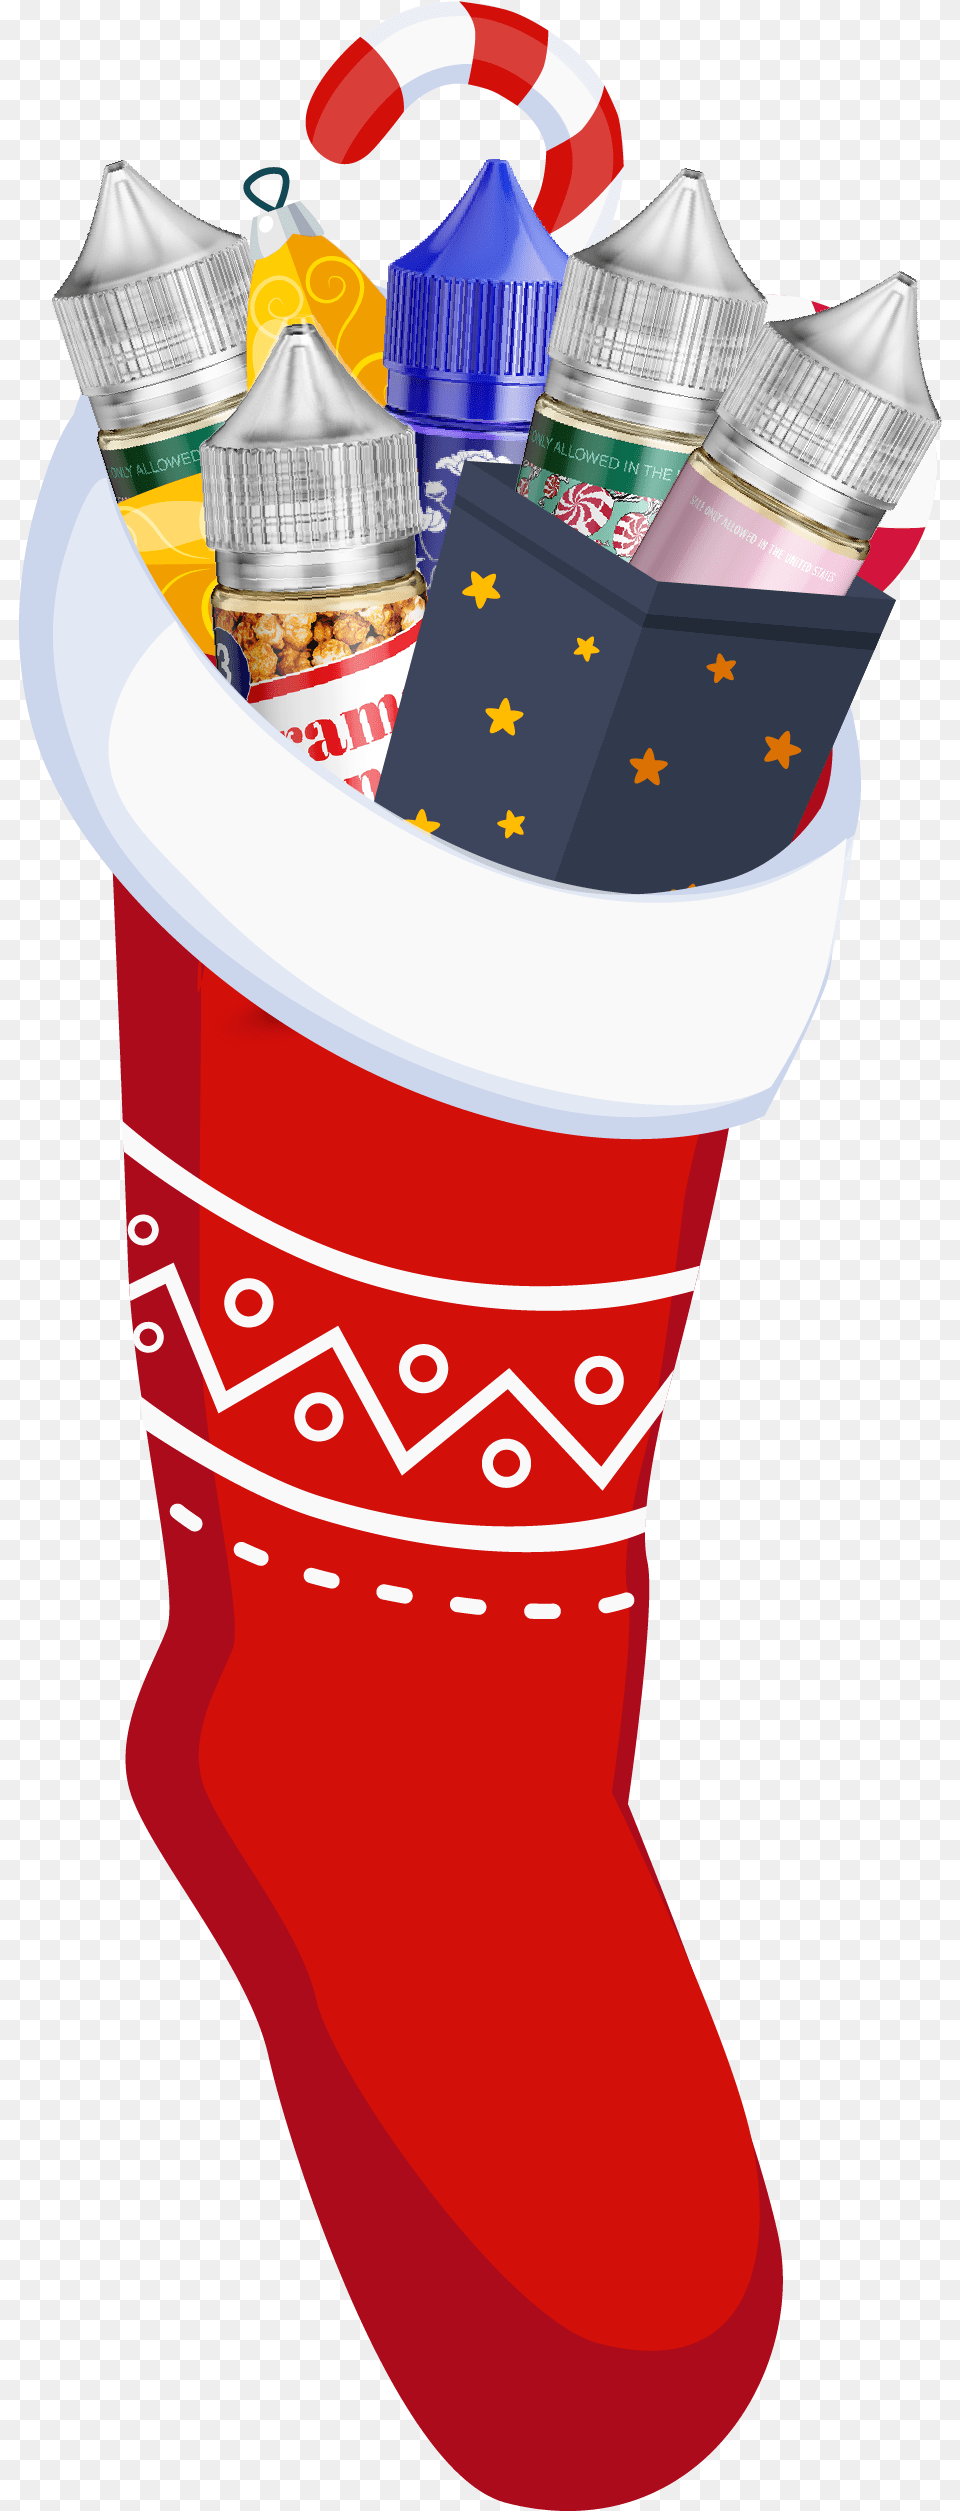 Download Hd Christmas Stocking Stuffer Christmas Stocking Clip Art, Hosiery, Gift, Clothing, Festival Free Png